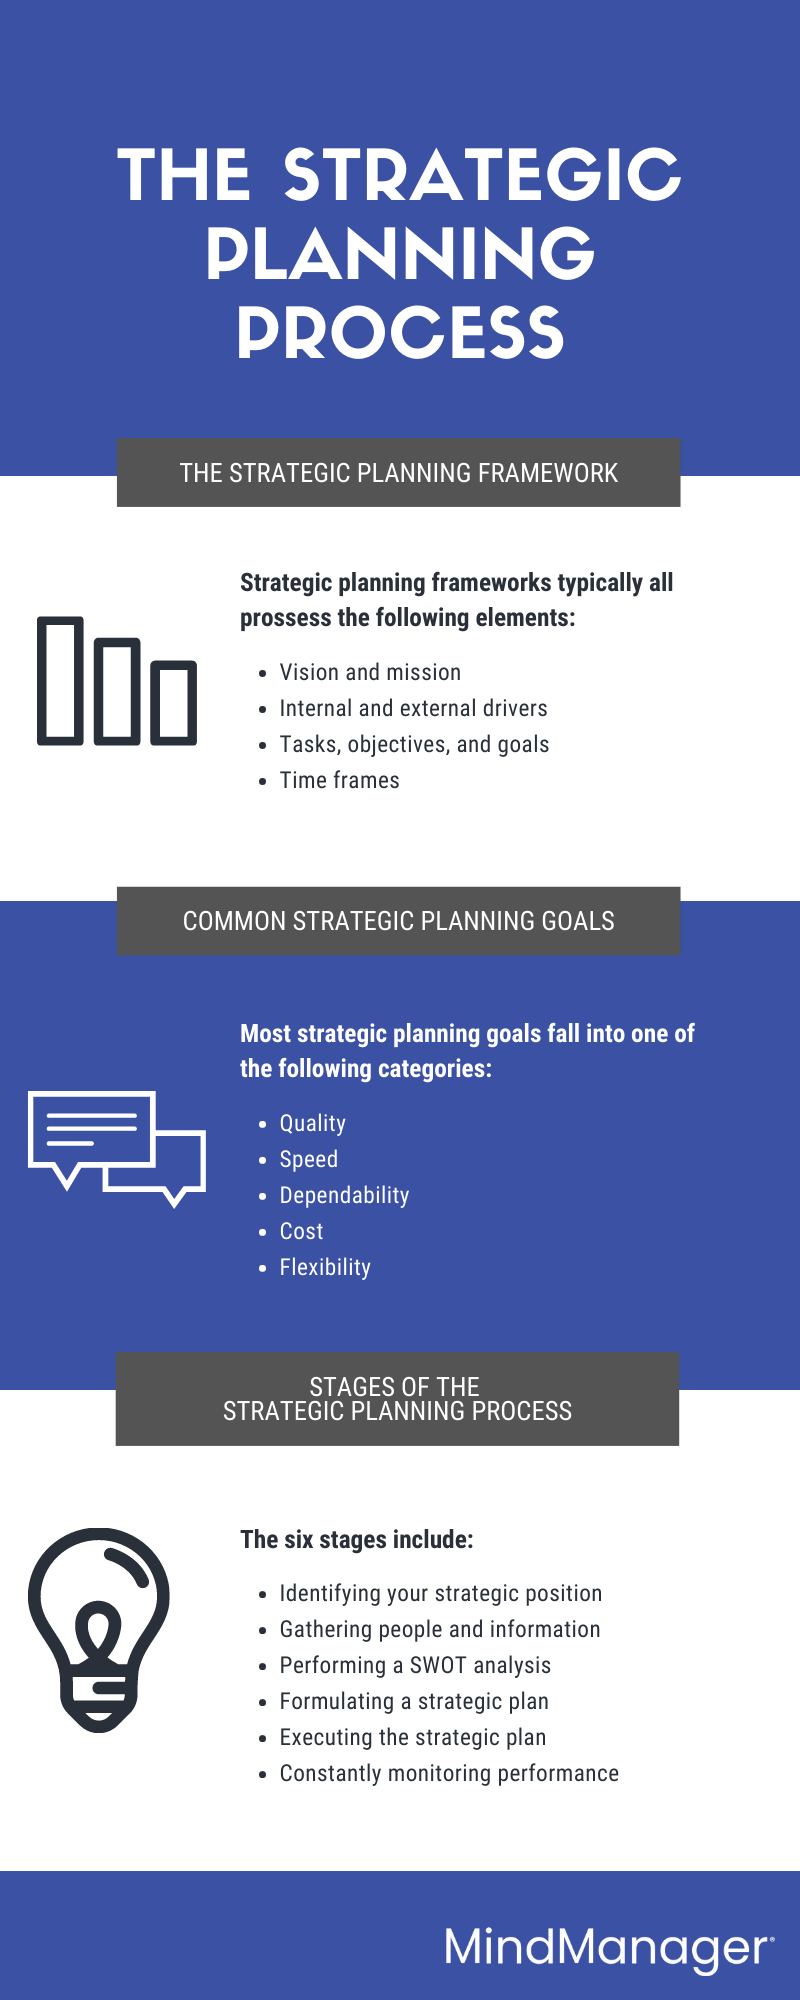 The 6 steps to the strategic planning process | MindManager Blog